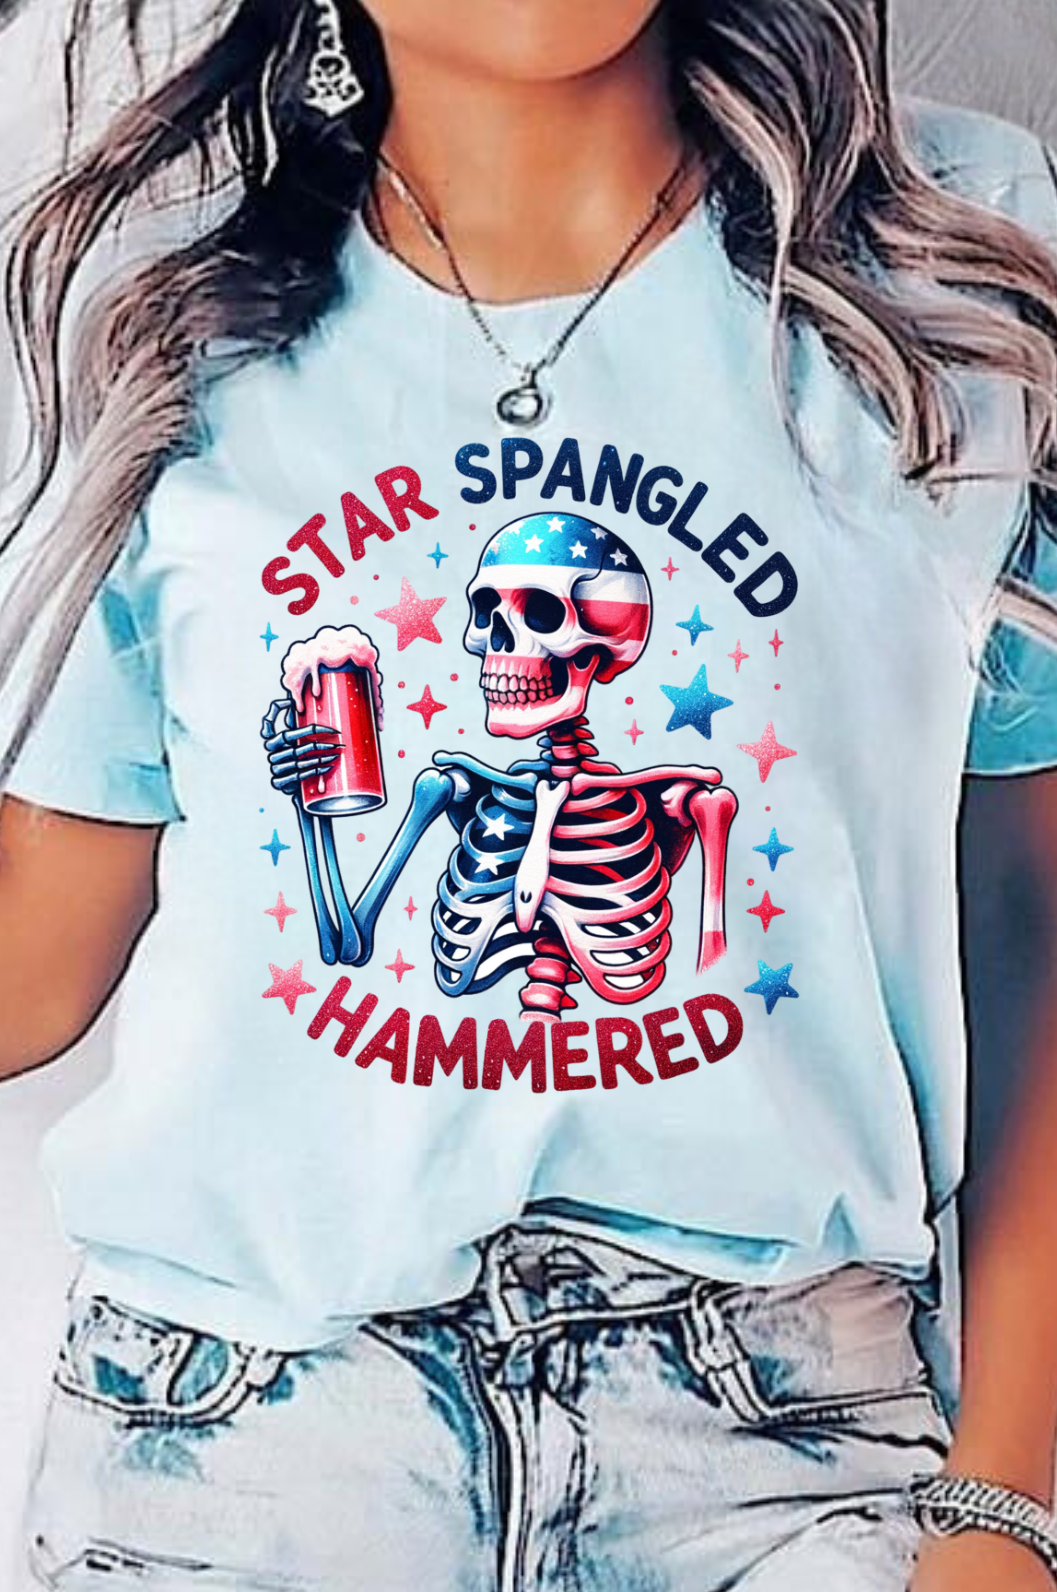 4th of July Star Spangled Hammered T-Shirt